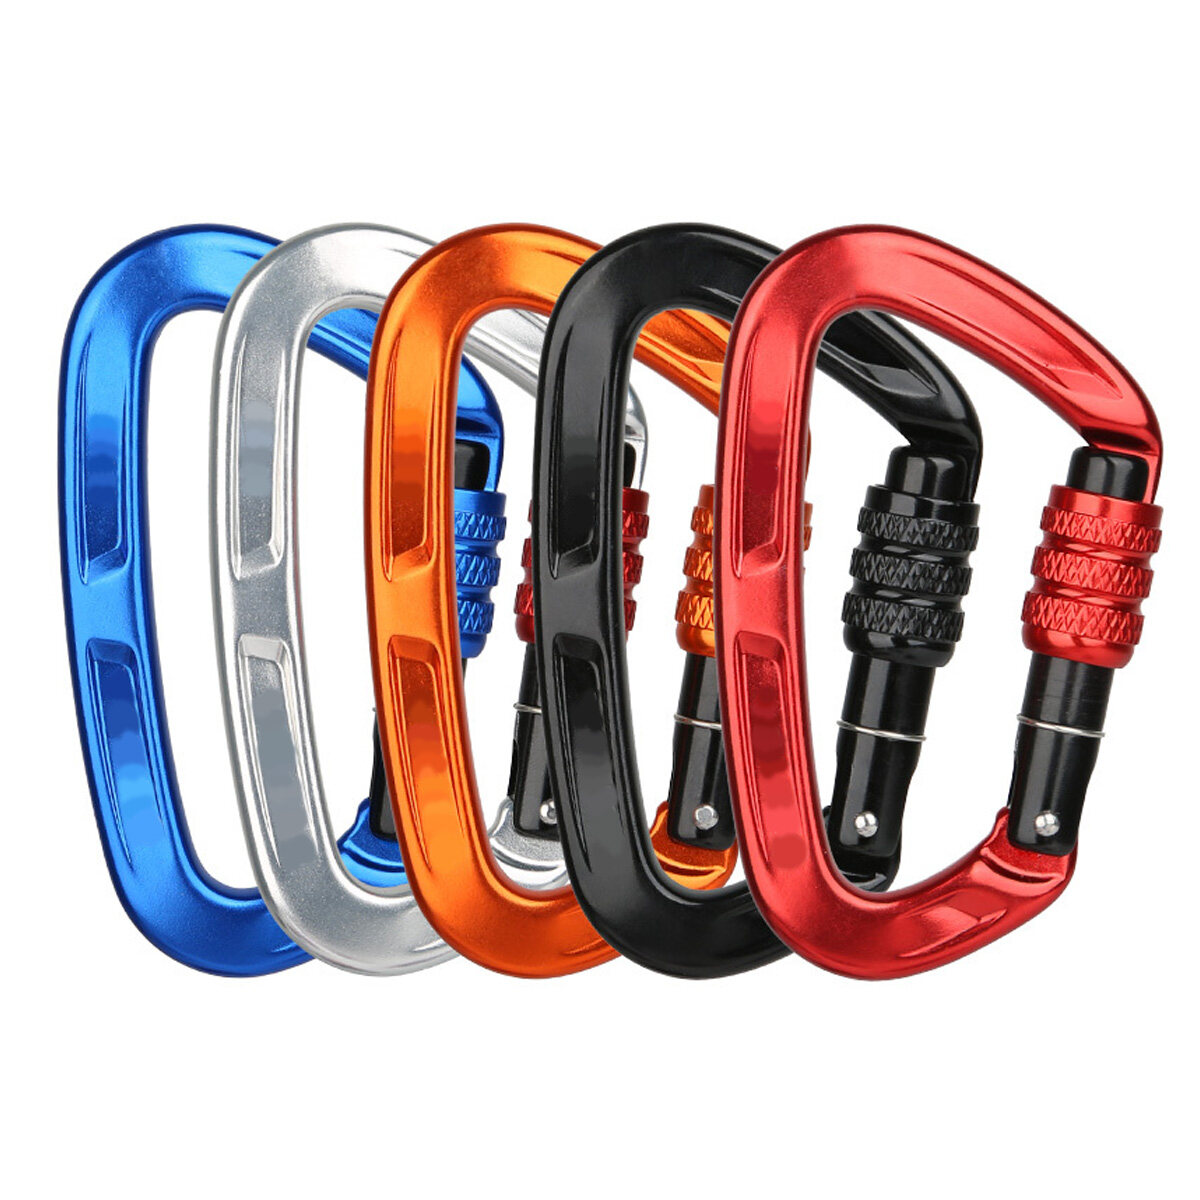 Rock Climbing Carabiner 25KN Safety D-Shape Buckle Screw Lock Spring-loaded Gate Aluminum Carabiner Outdoor Kits